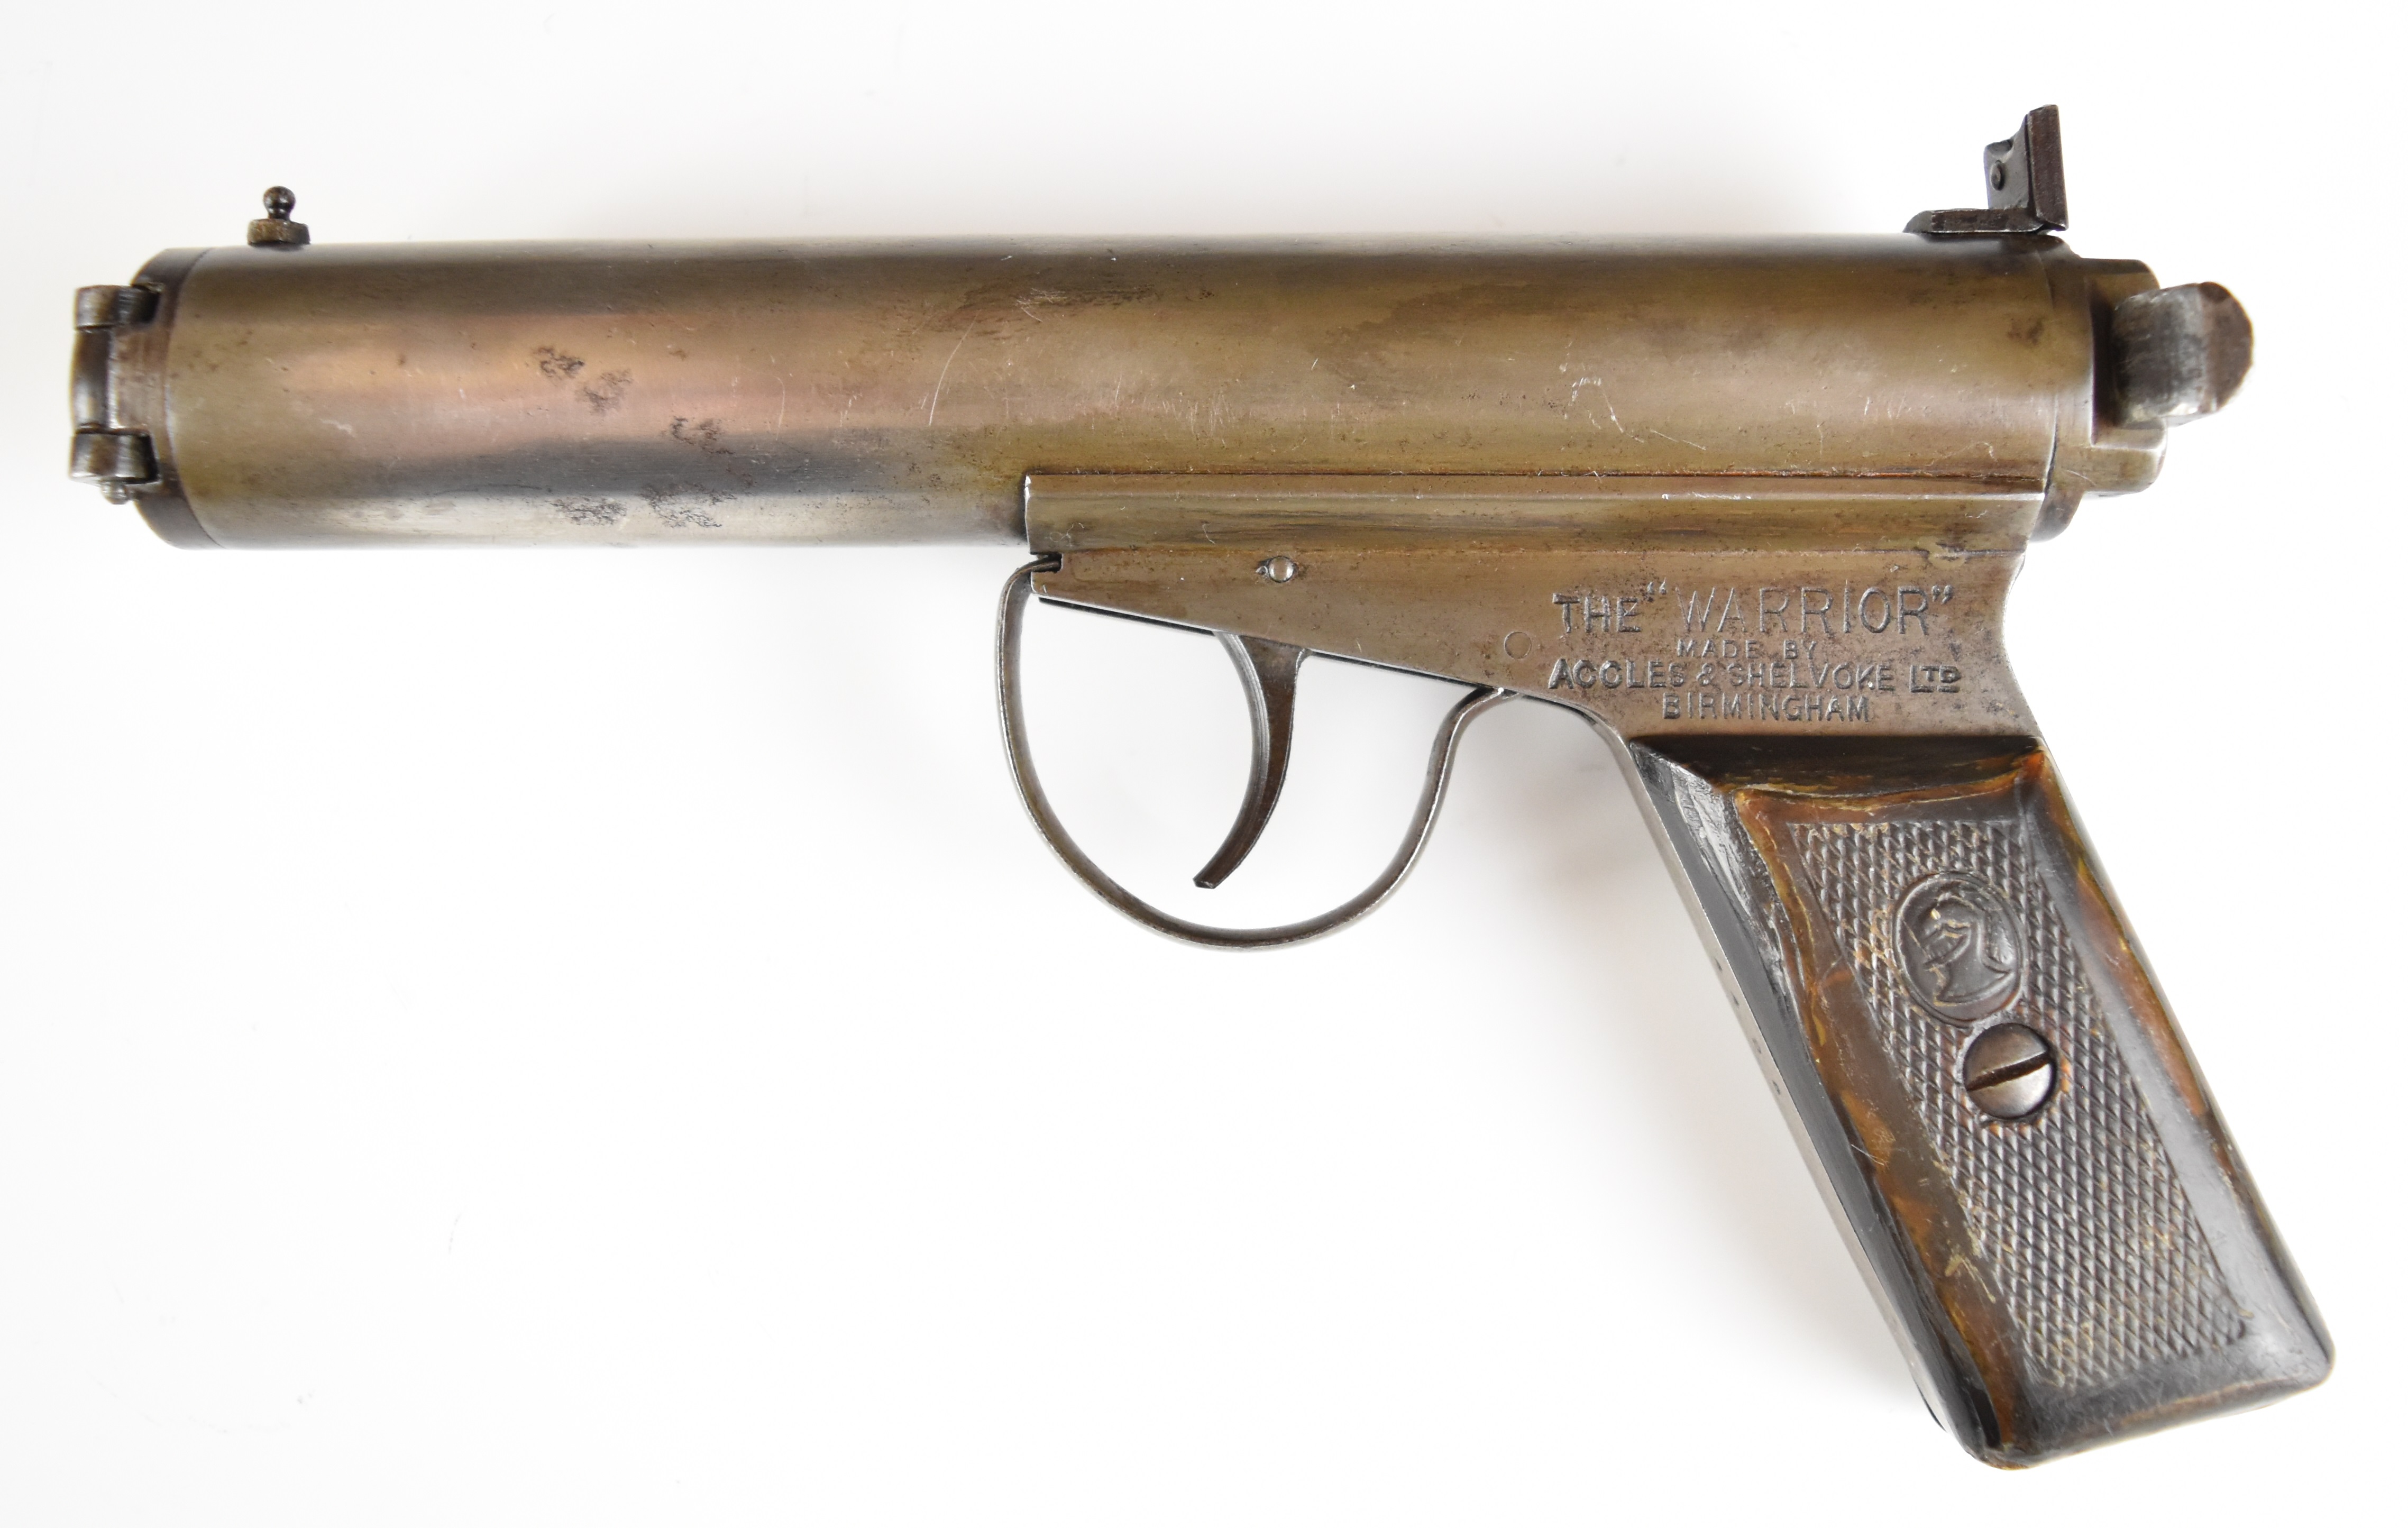 Accles & Shelvoke Ltd F Clarke patent The Warrior .177 side lever air pistol with logo and - Image 2 of 12